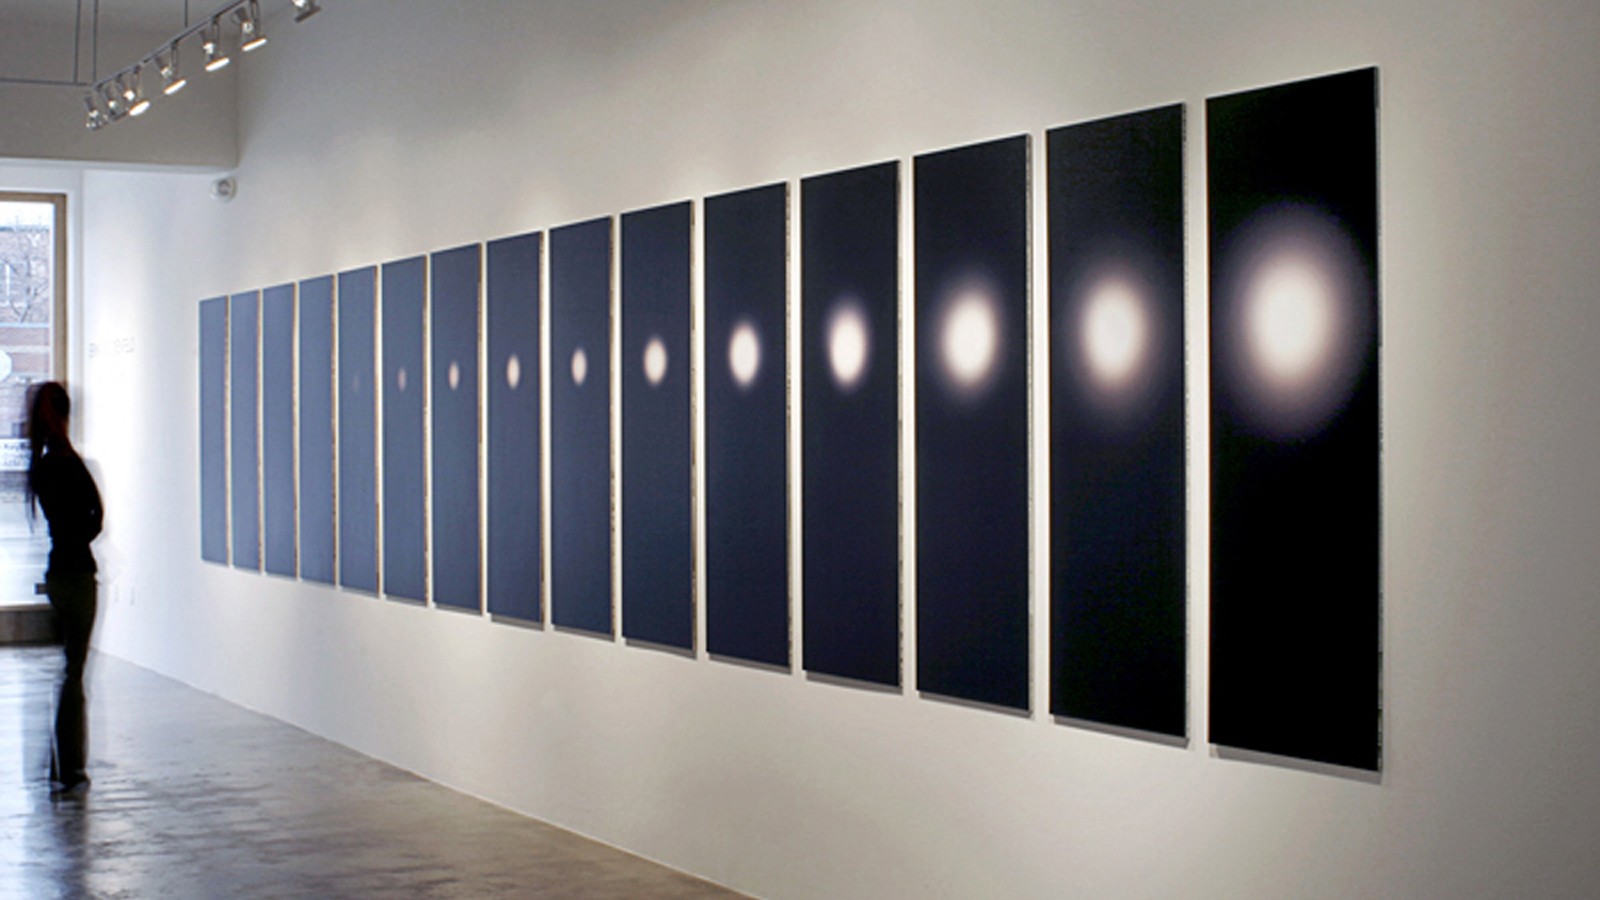 Light Recording: Greatest Lunar Apogee/Perigee of 2004. Installation view: RULE Gallery, Denver, CO, solo exhibition, 2006 - Photo courtesy Erika Blumenfeld